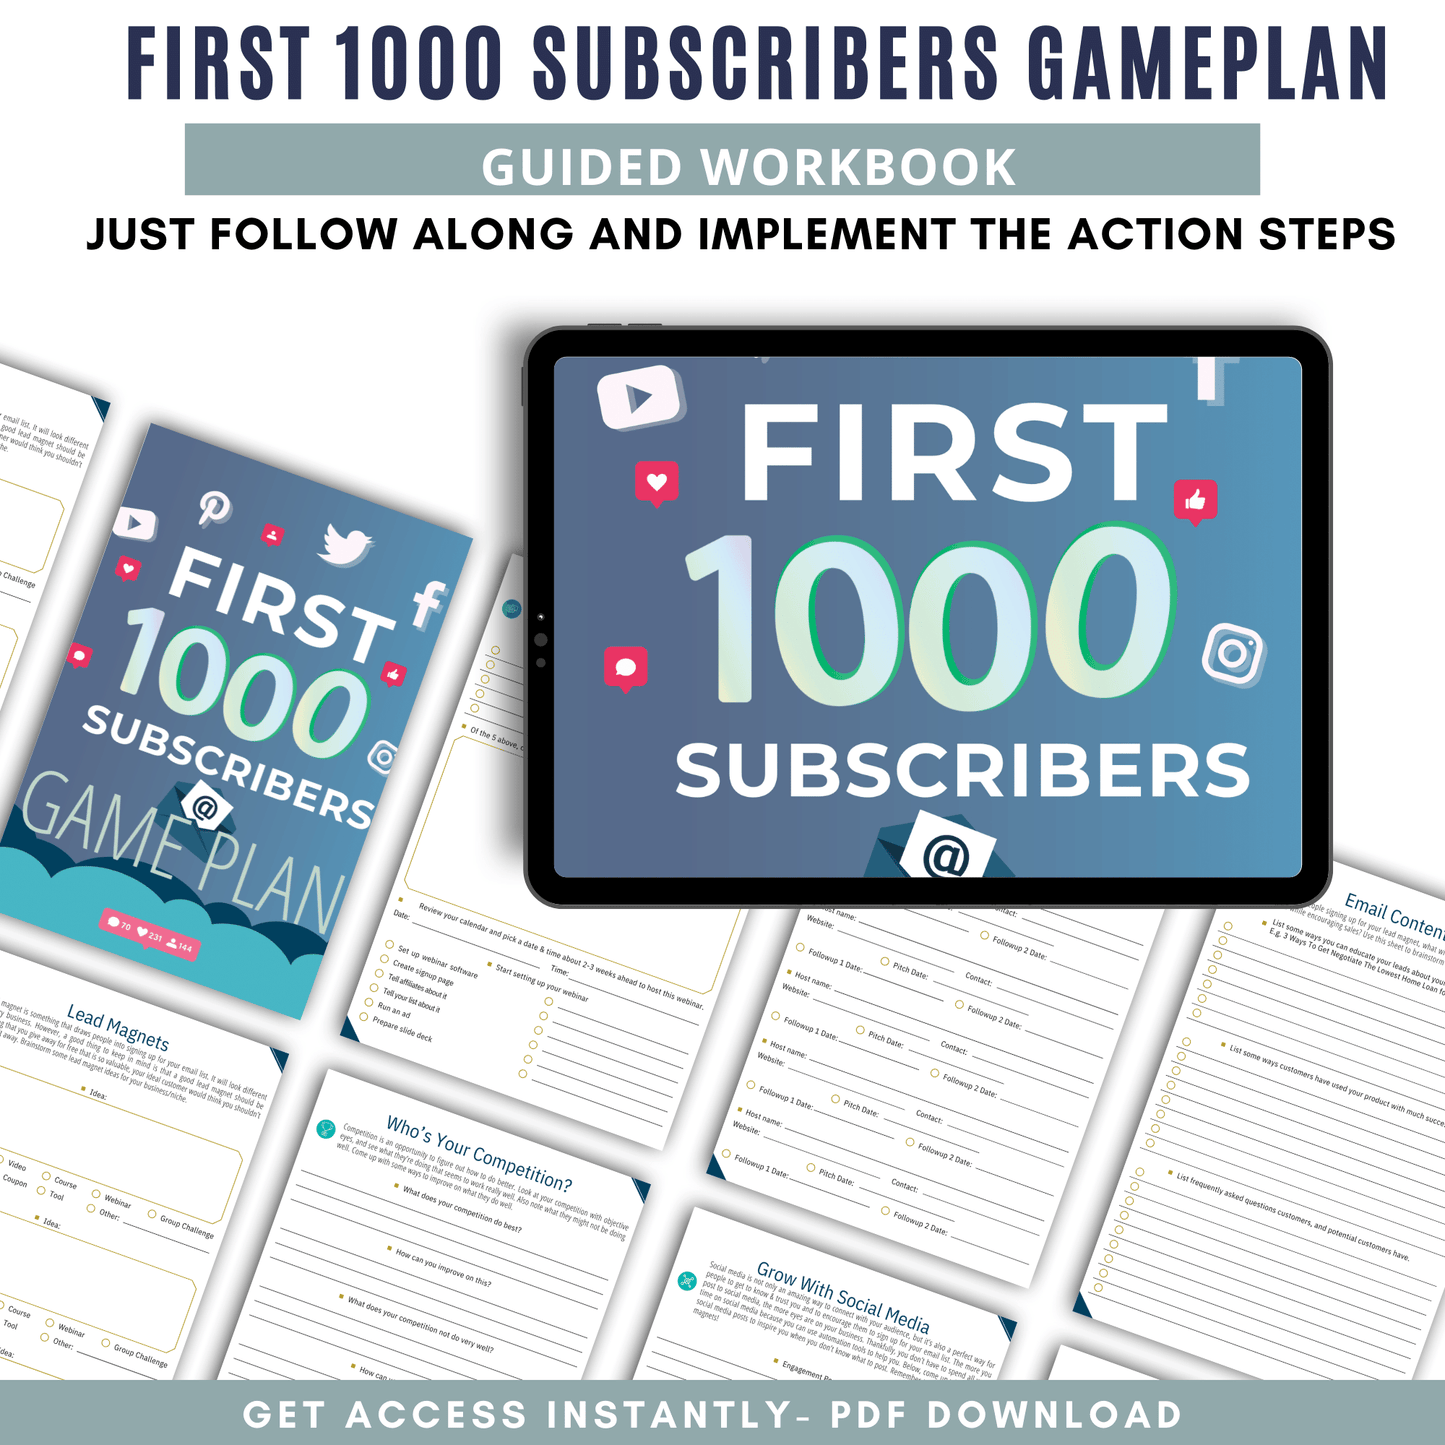 First 1000 Subscribers Workbook